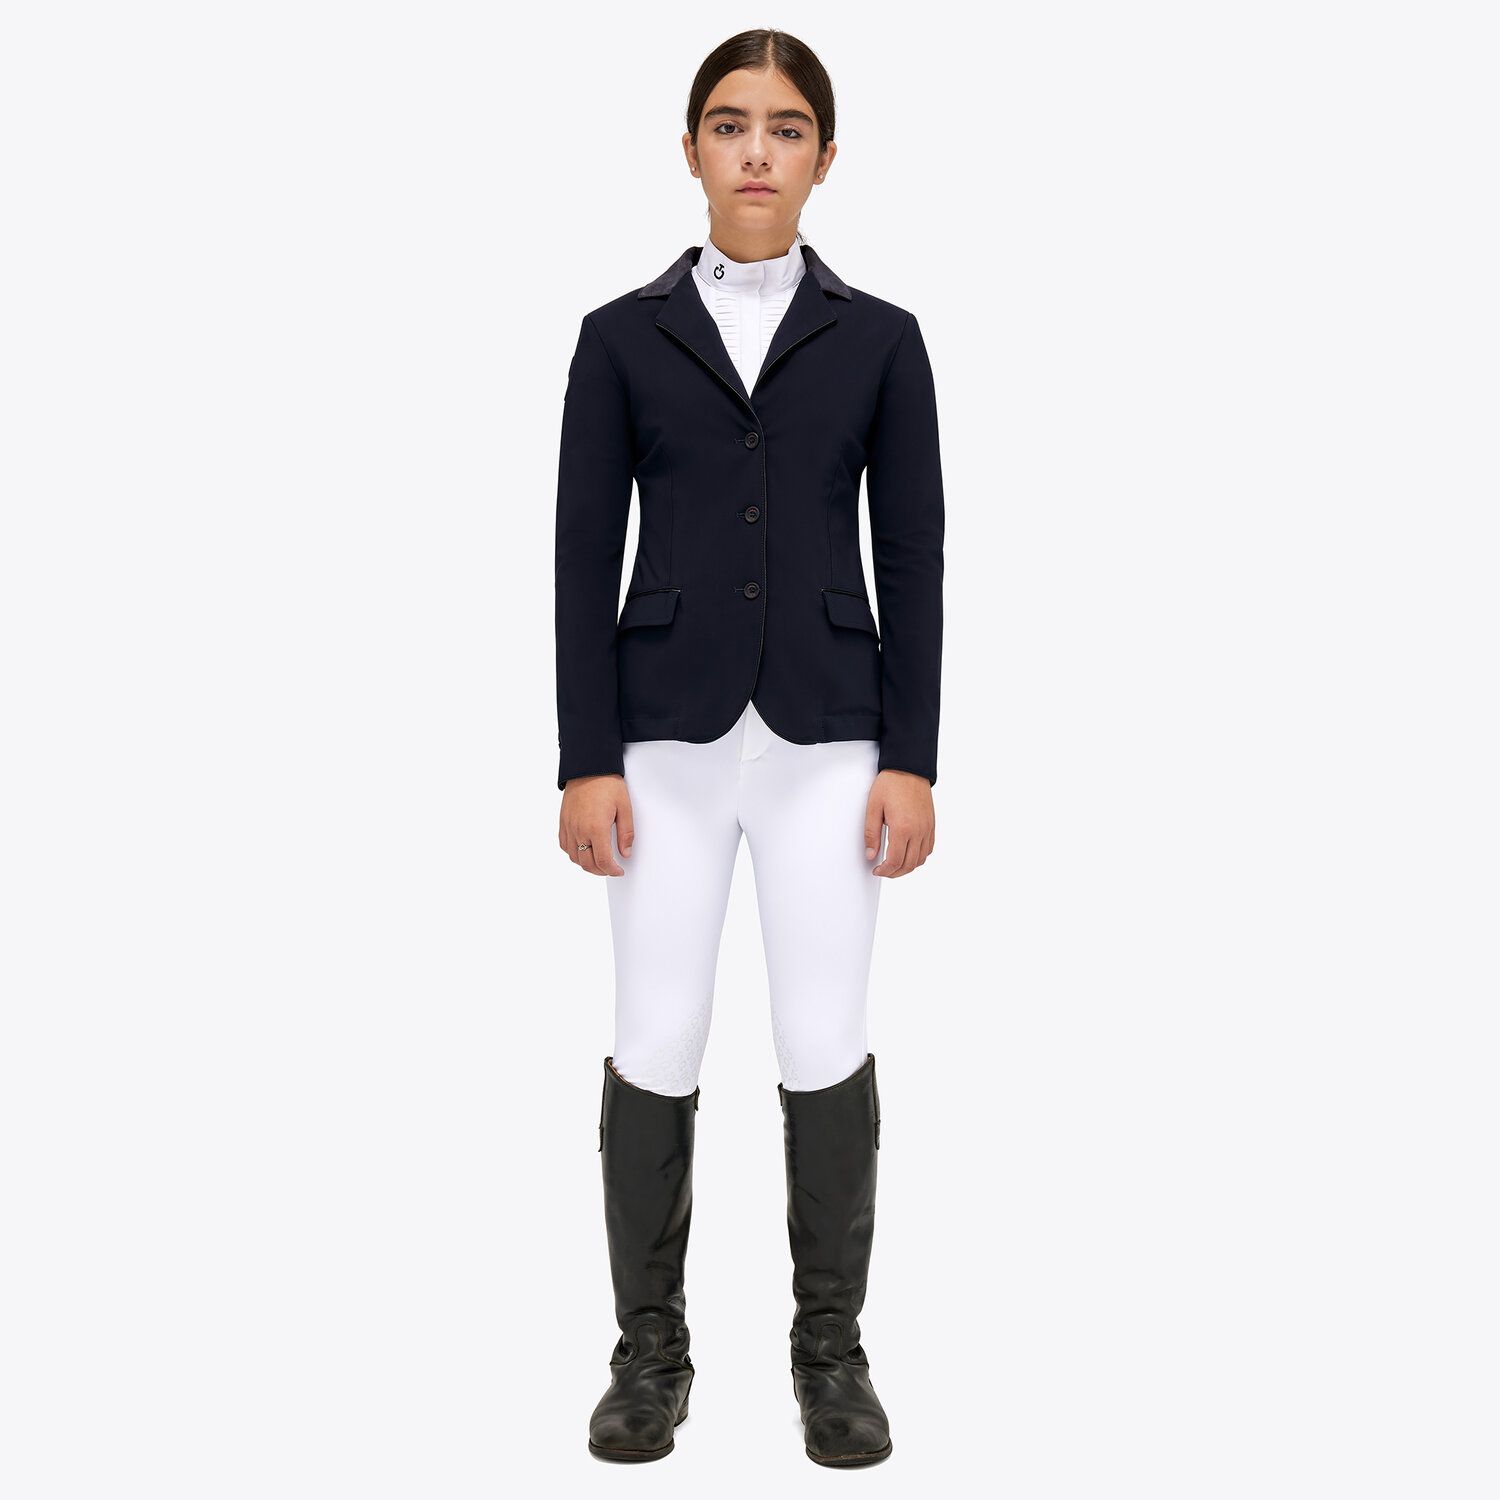 Cavalleria Toscana Girl's competition riding jacket. NAVY-1